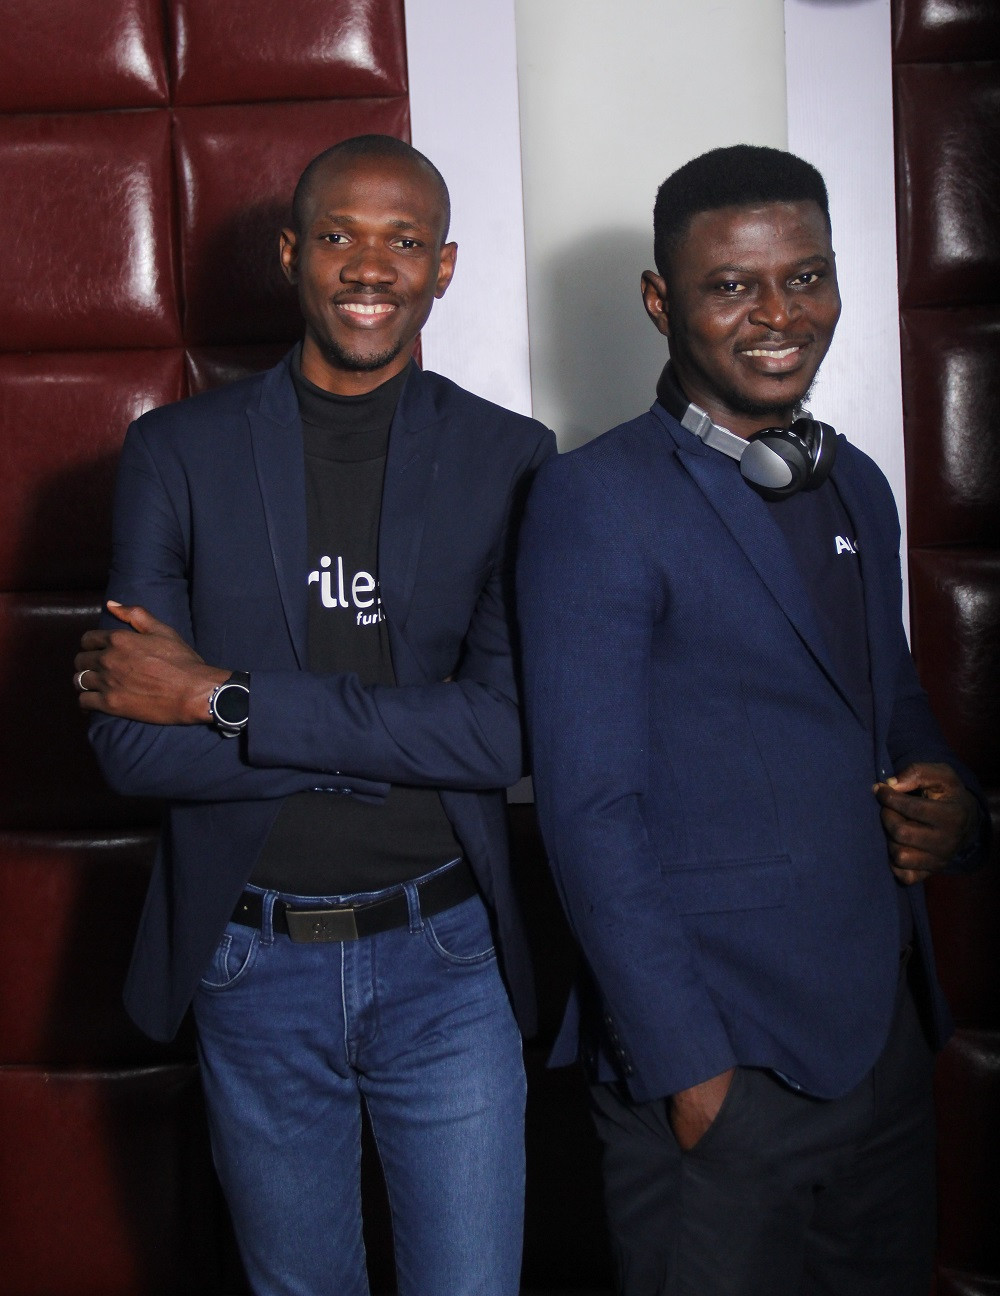 Nigerian EdTech startup Afrilearn provides free, world-class education for Primary and Secondary Students